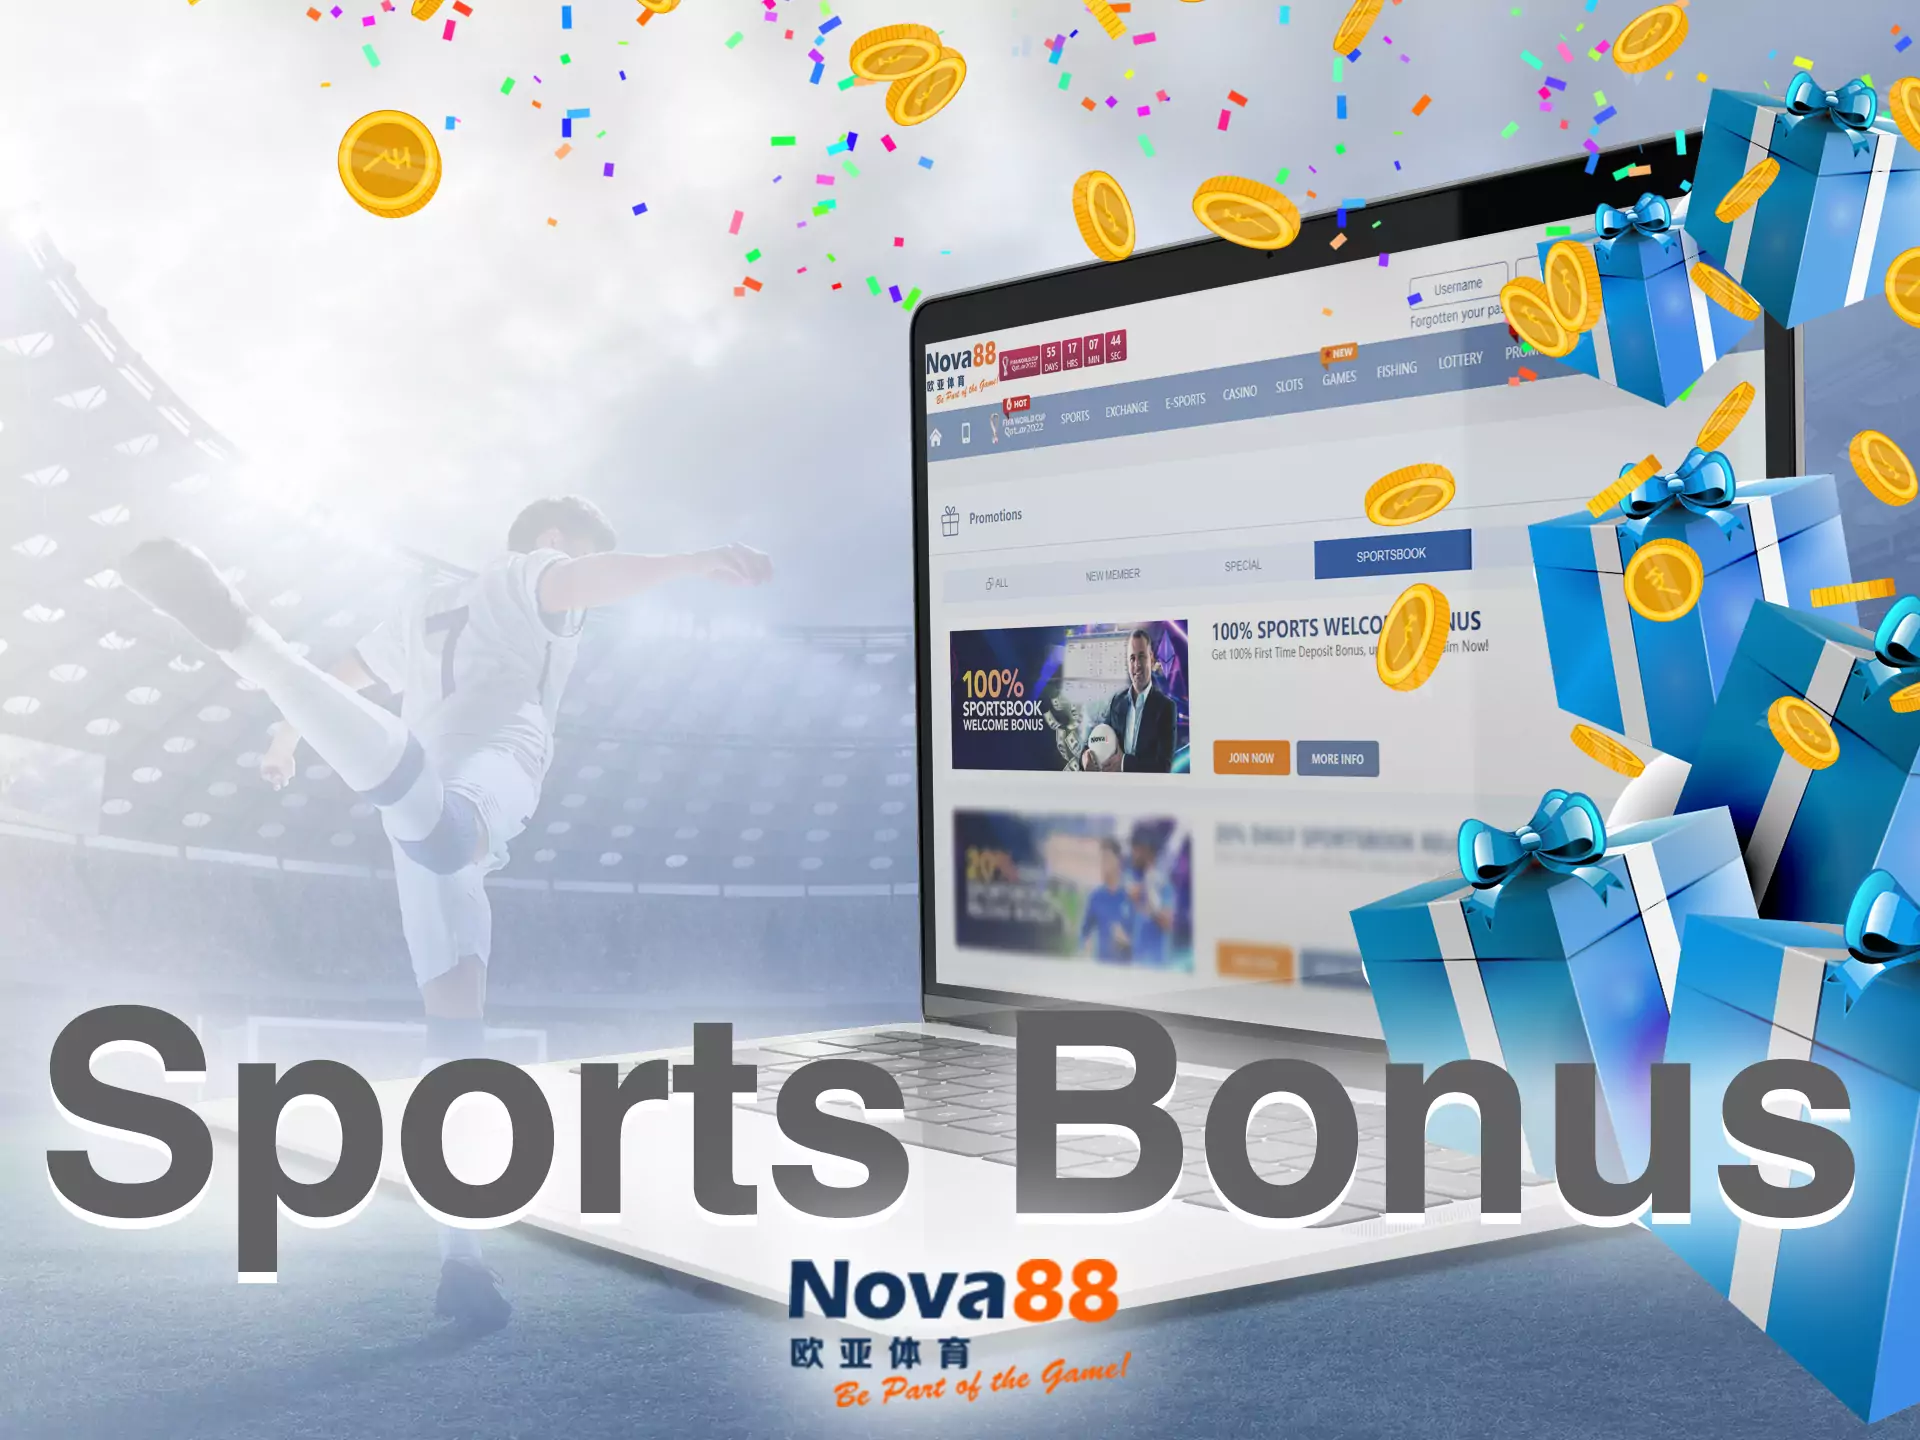 New users of Nova88 can use a welcome offer on sports betting.